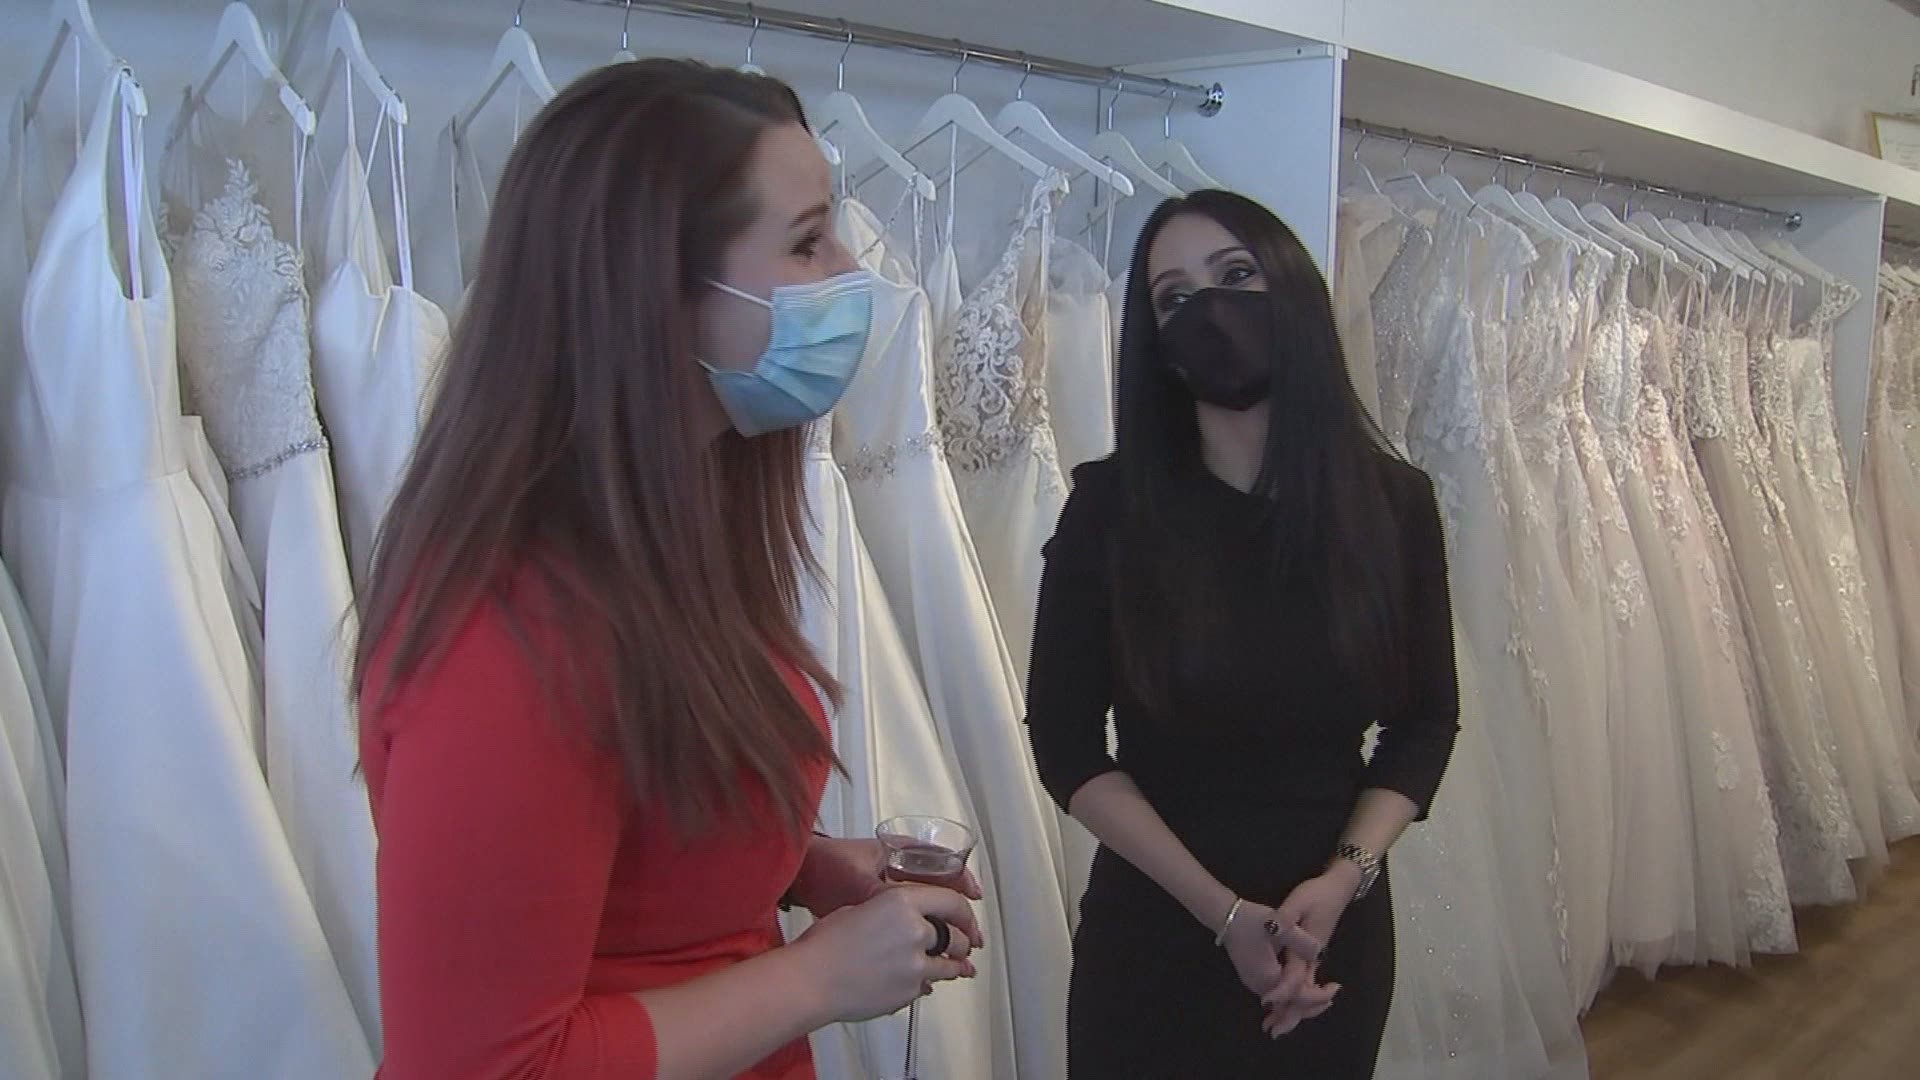 An Illinois bridal shop owner is giving a few lucky frontline workers the wedding dress of their dreams — for free